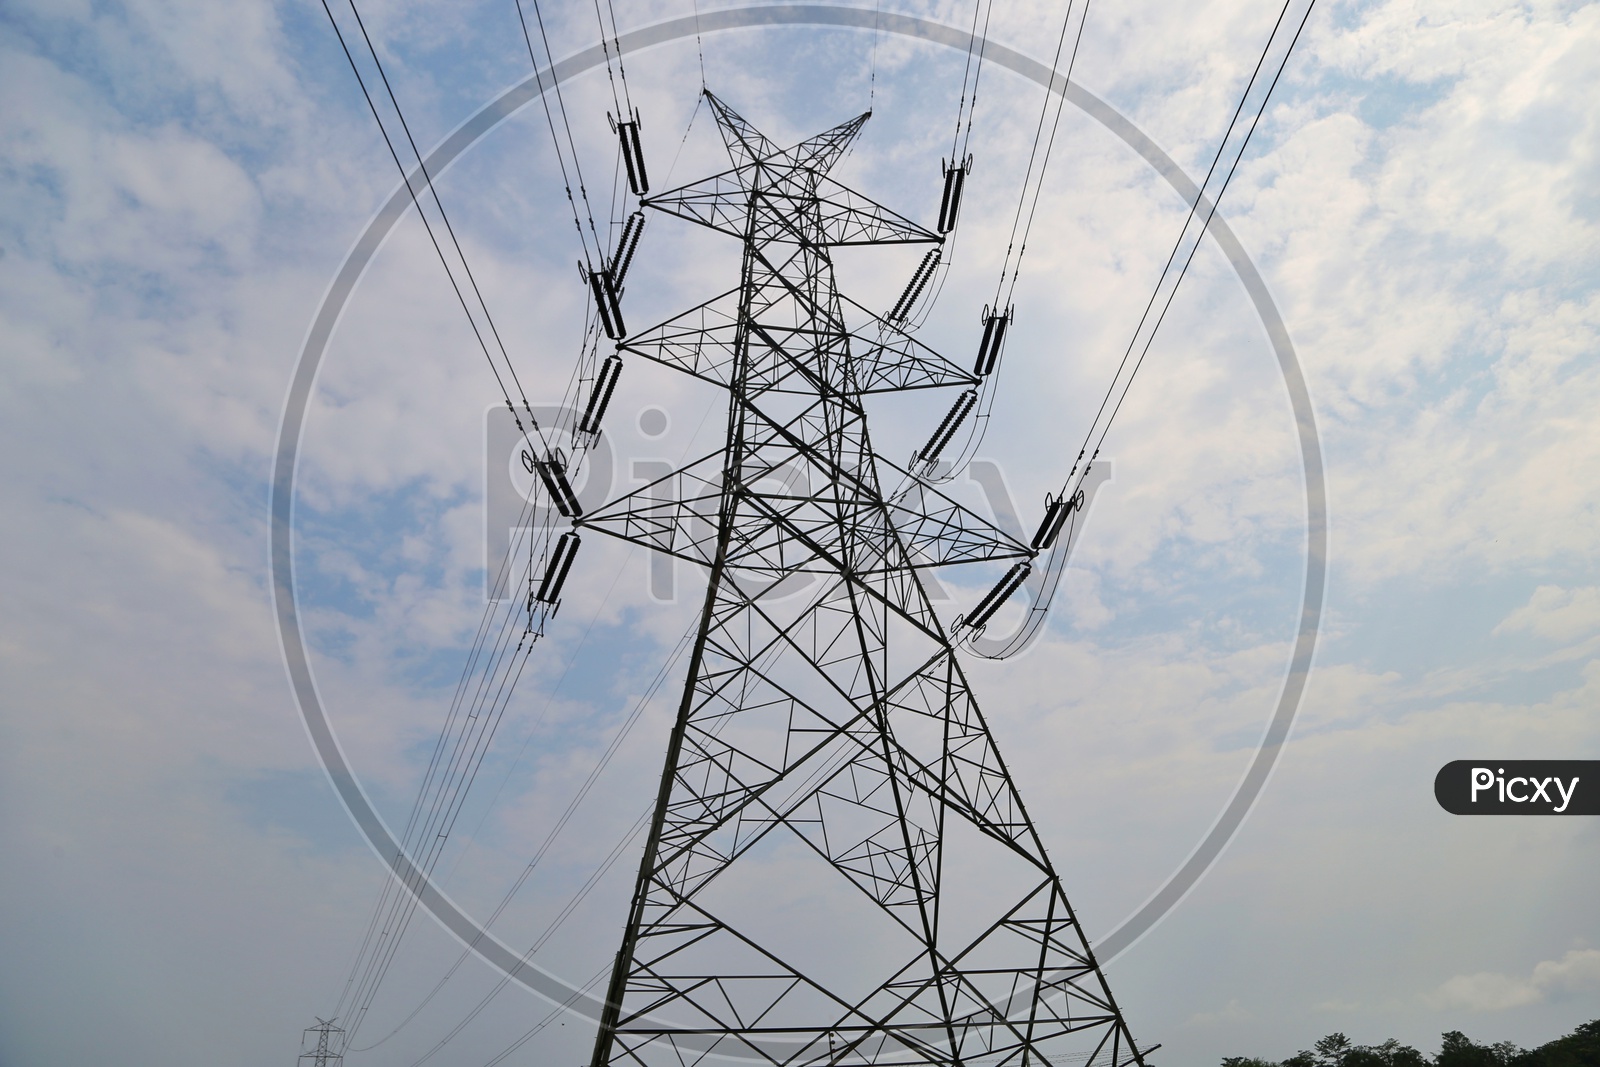 Electric High Tension Poles With  Electric Wires